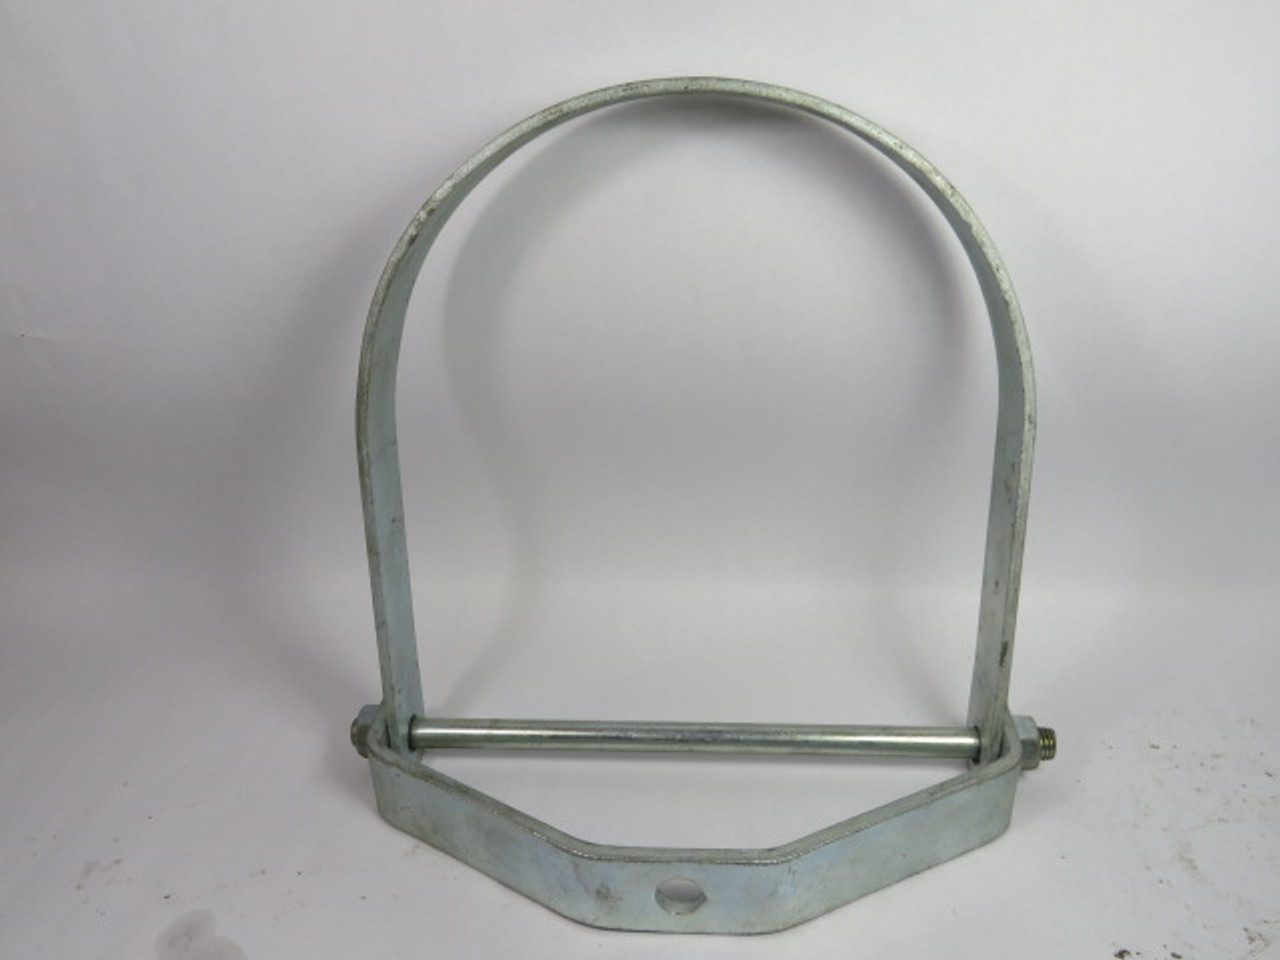 Generic 32N12 Clevis Hanger 12" OD USED